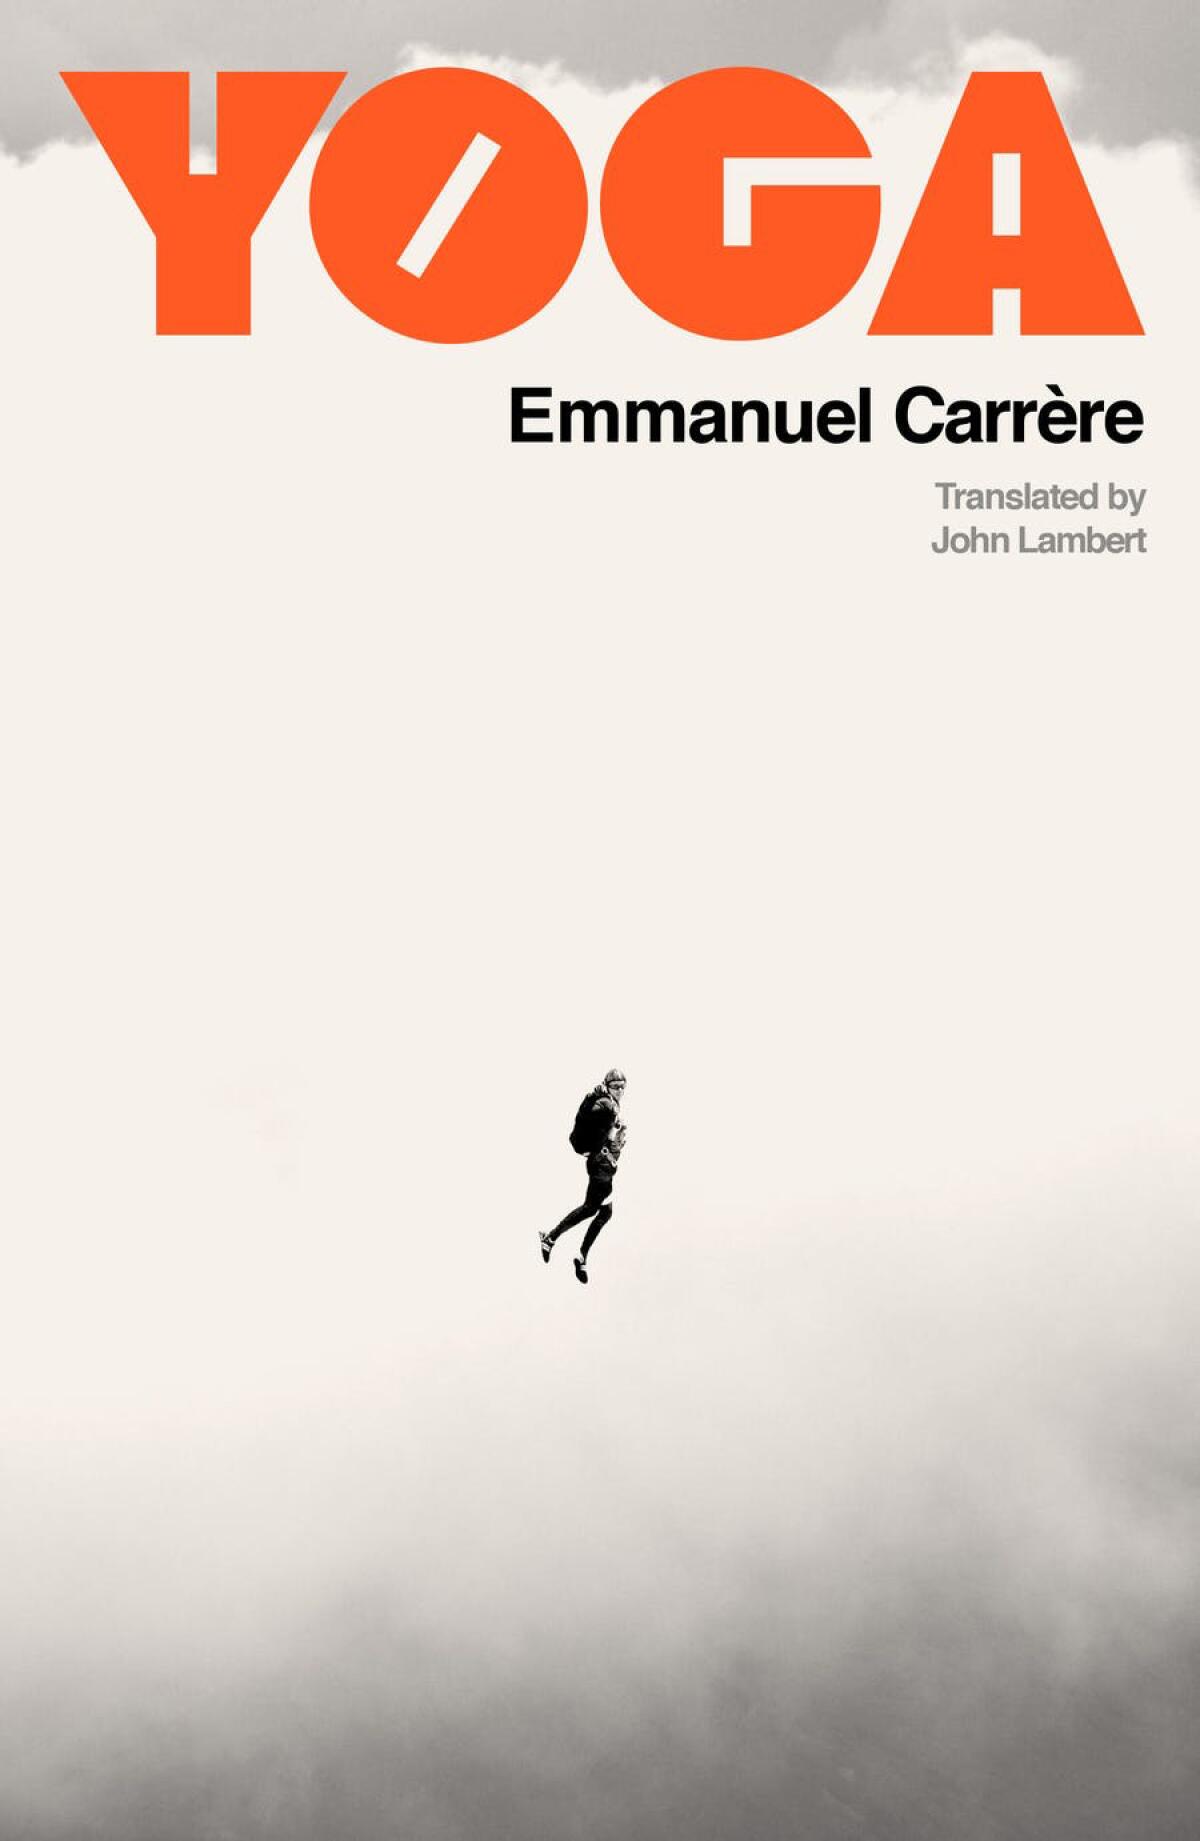 "Yoga" by Emmanuel Carrère, translated from the French by John Lambert